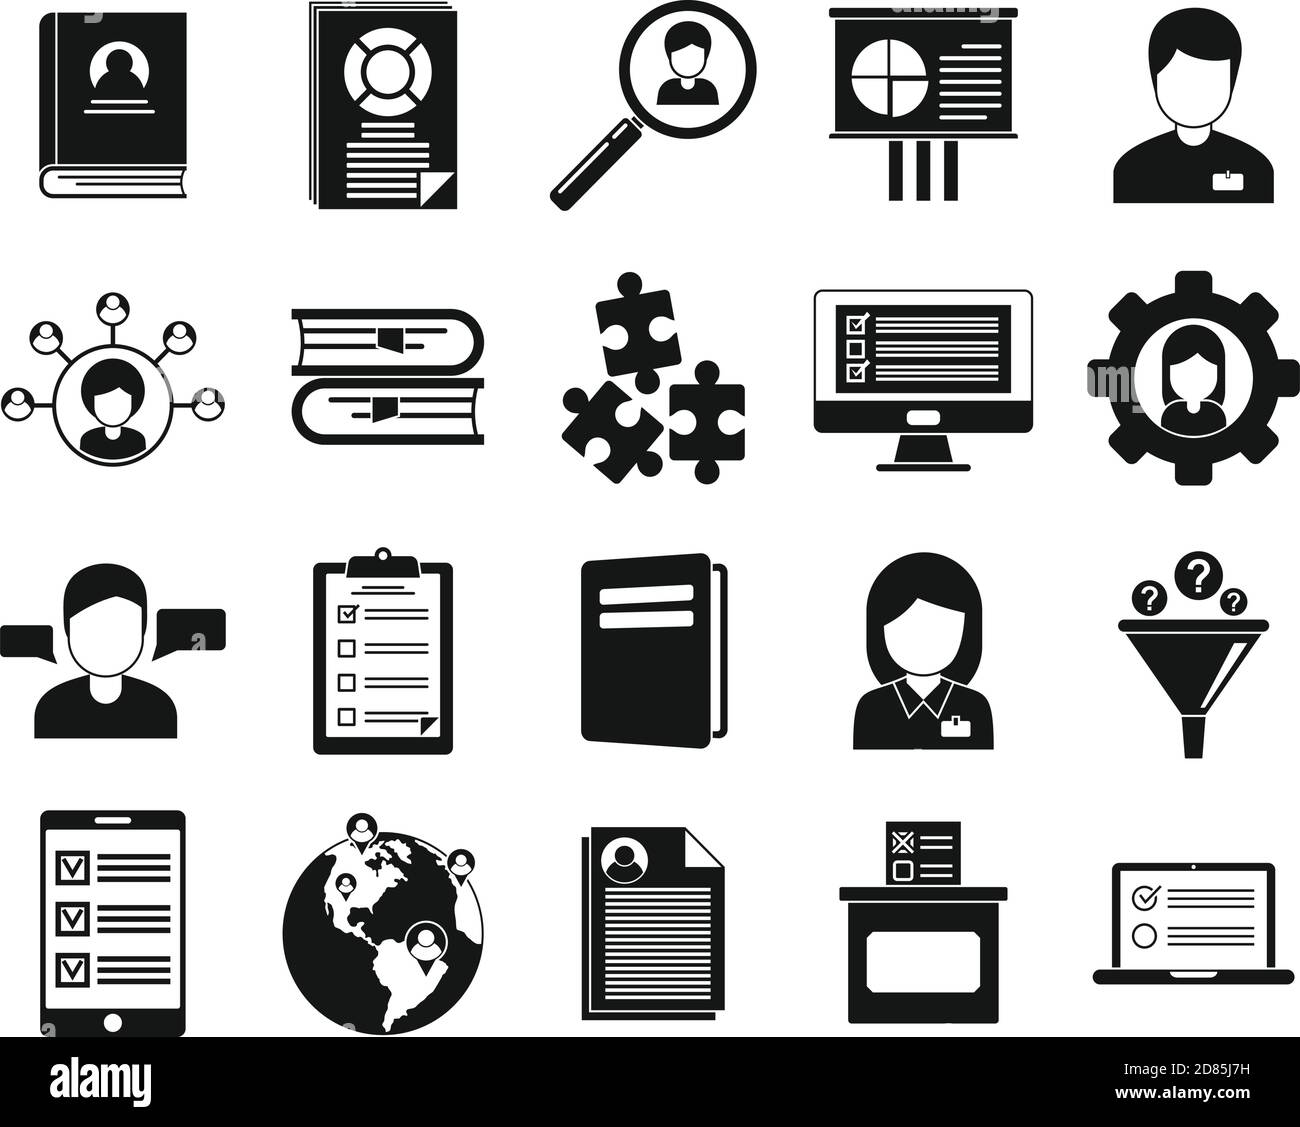 Sociology communication icons set, simple style Stock Vector